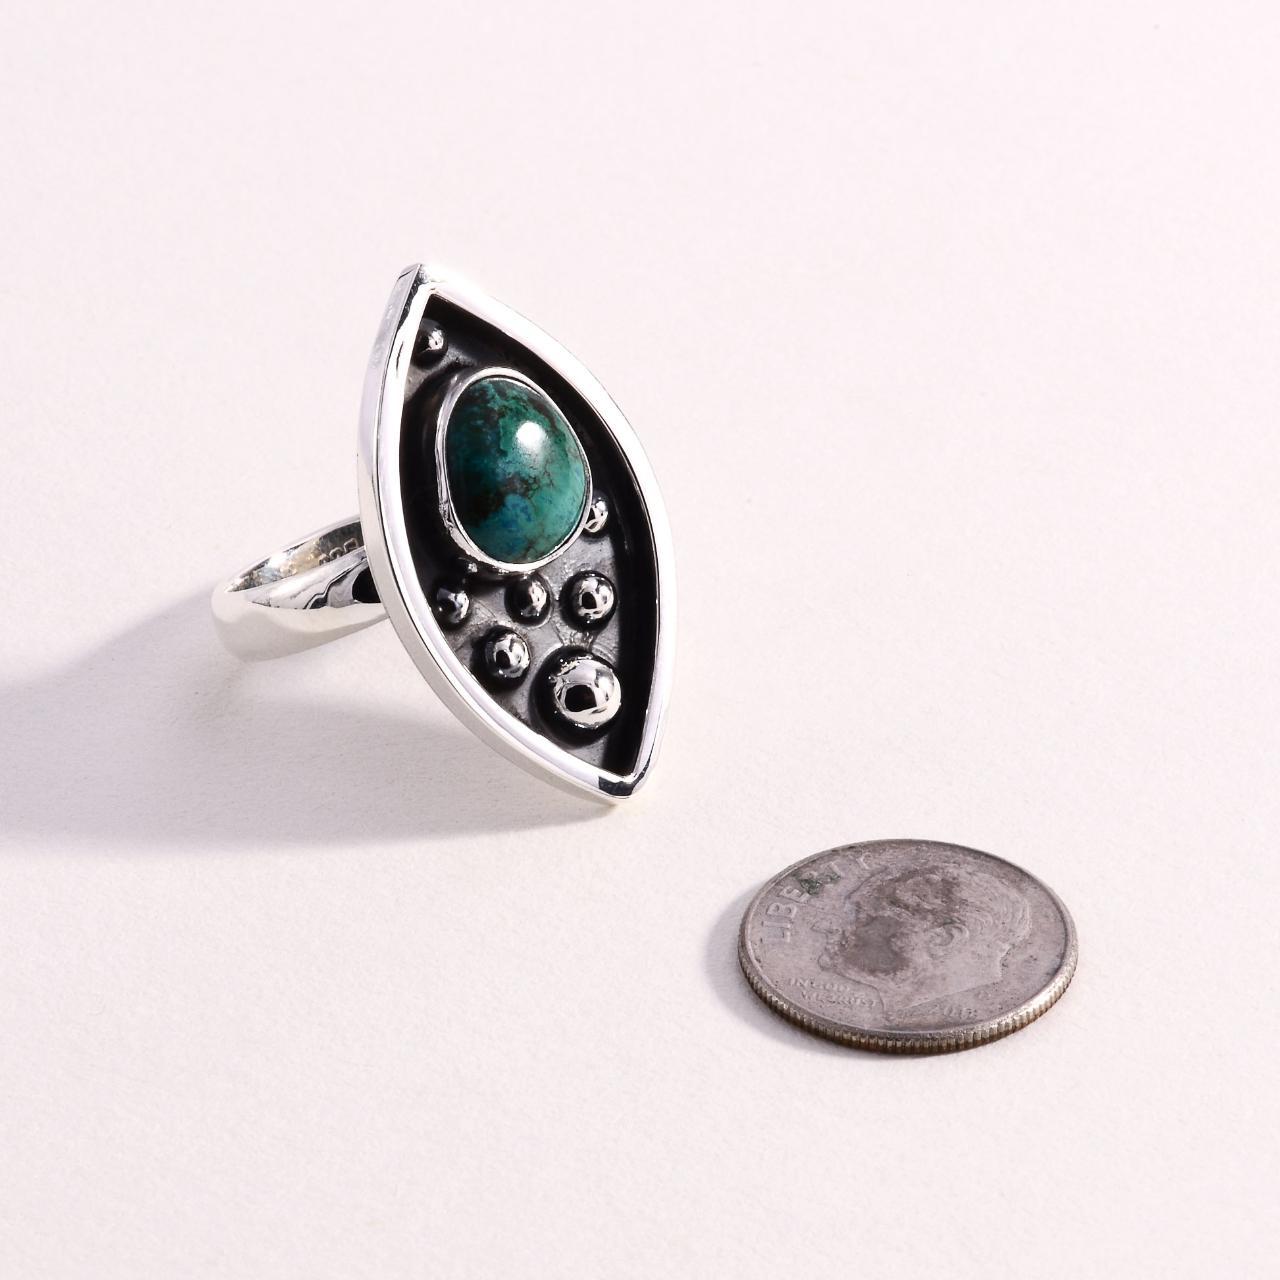 Product Image 3 - Sterling 925 Chrysocolla Ring

Sterling Silver

Size